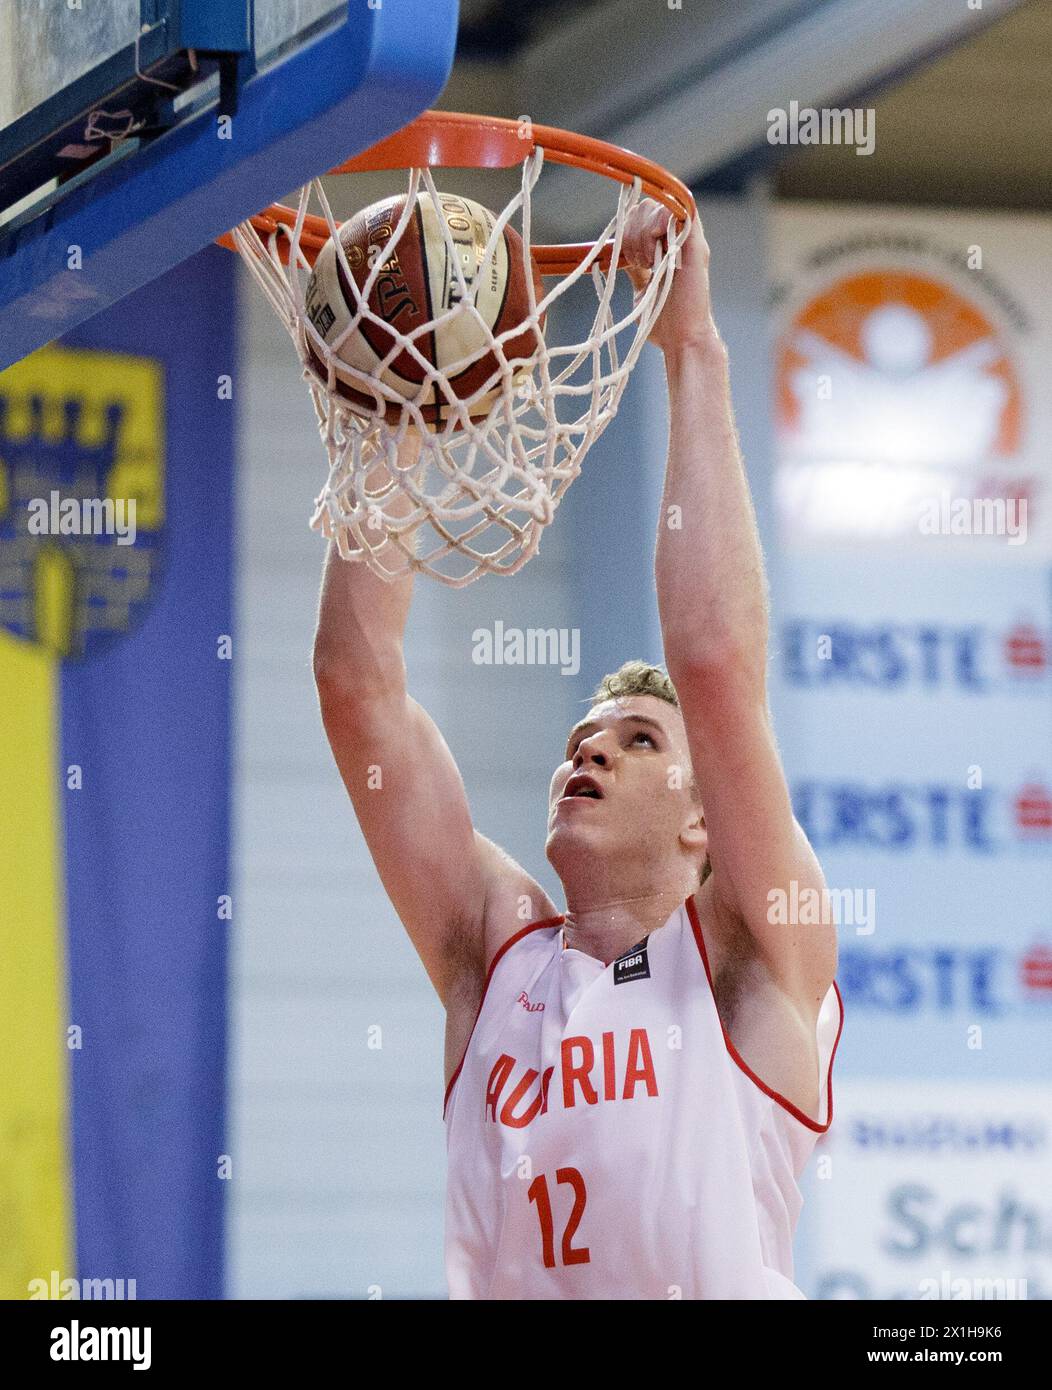 Austrian basketballer Jakob Poeltl from Raptors has been traded to the San Antonio Spurs, the Spurs announced on 18 th July 2018. PICTURE: (FILE PHOTO) Jakob Poeltl   during match between Austria and Bulgaria on 22 nd July 2017 in Güssing, Austria. - 20170722 PD5368 - Rechteinfo: Rights Managed (RM) Stock Photo